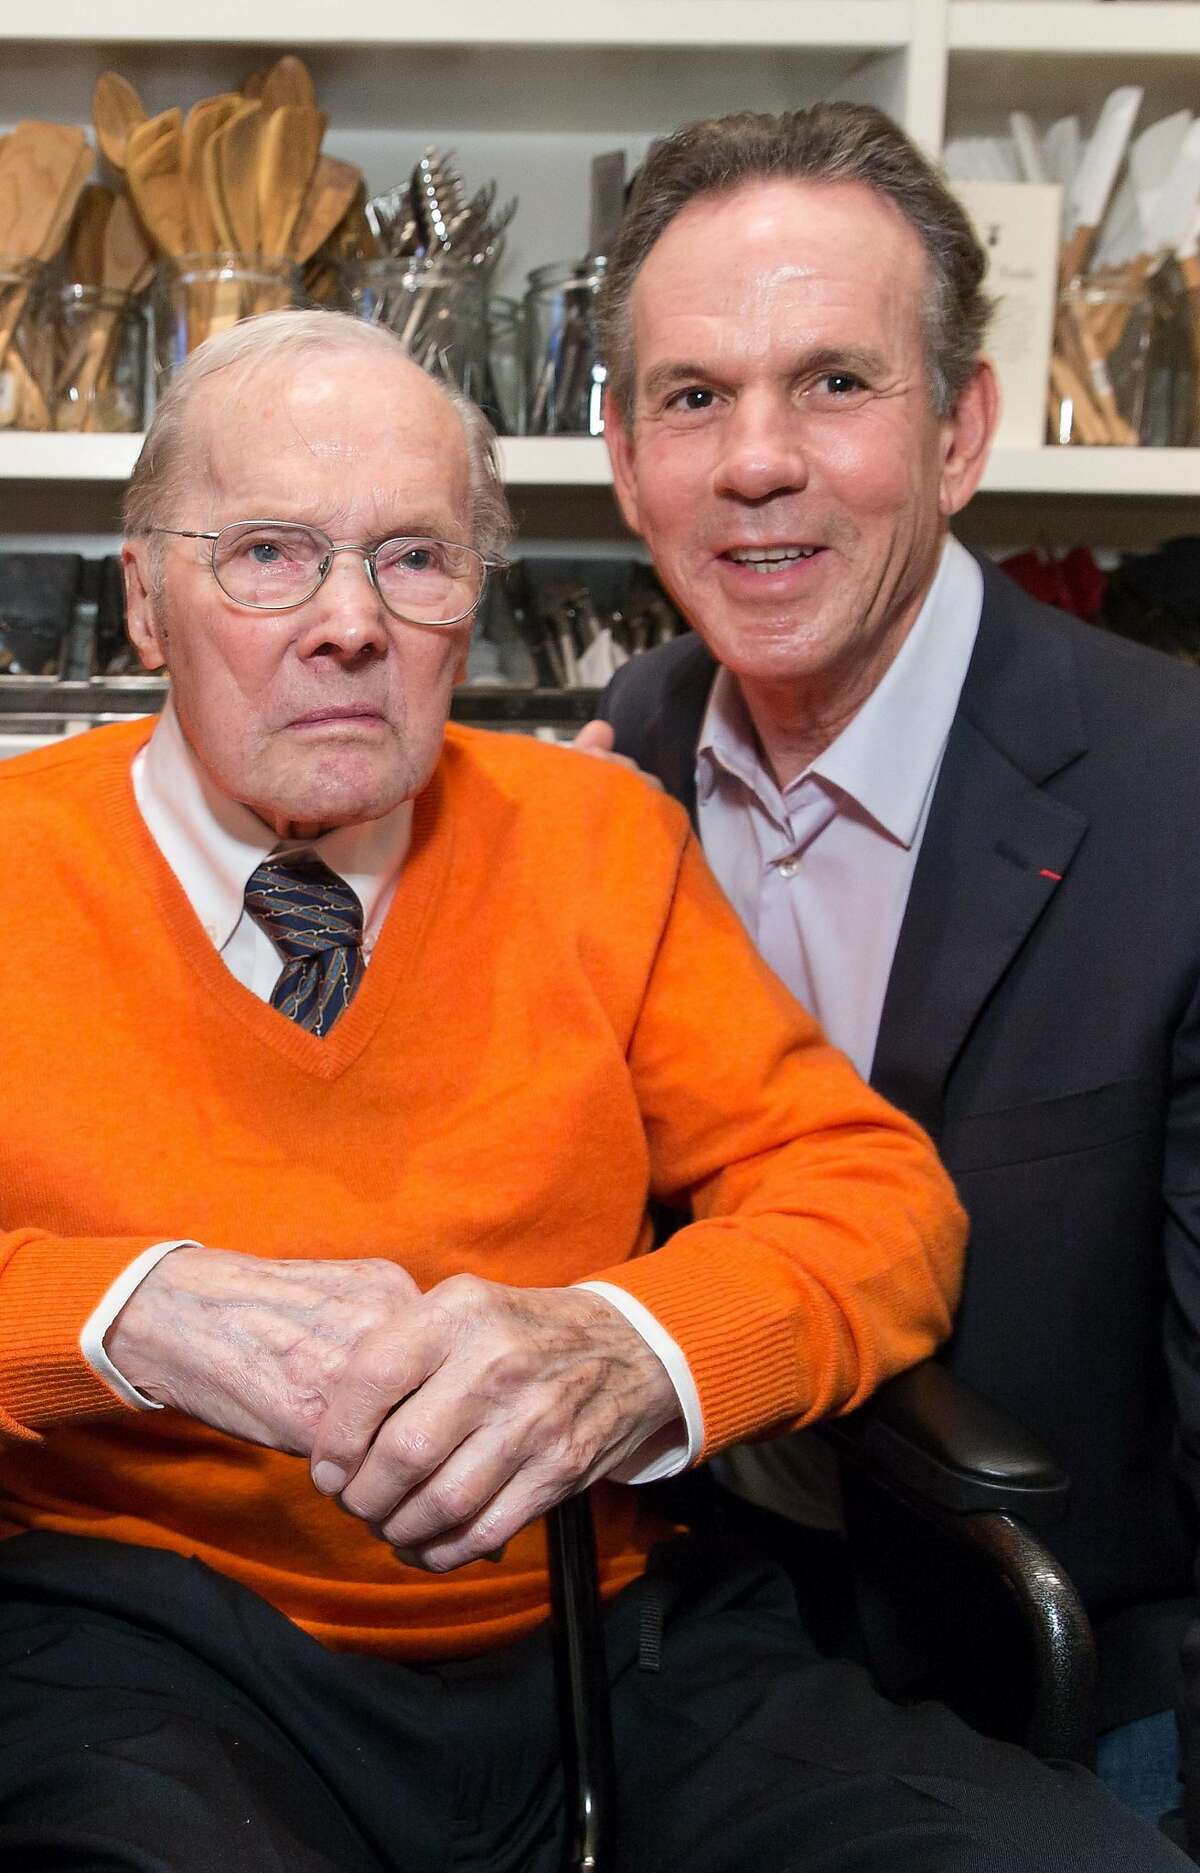 Homeware king Chuck Williams (left) celebrated his 99th birthday with chef Thomas Keller at his original Sonoma store in 2014.